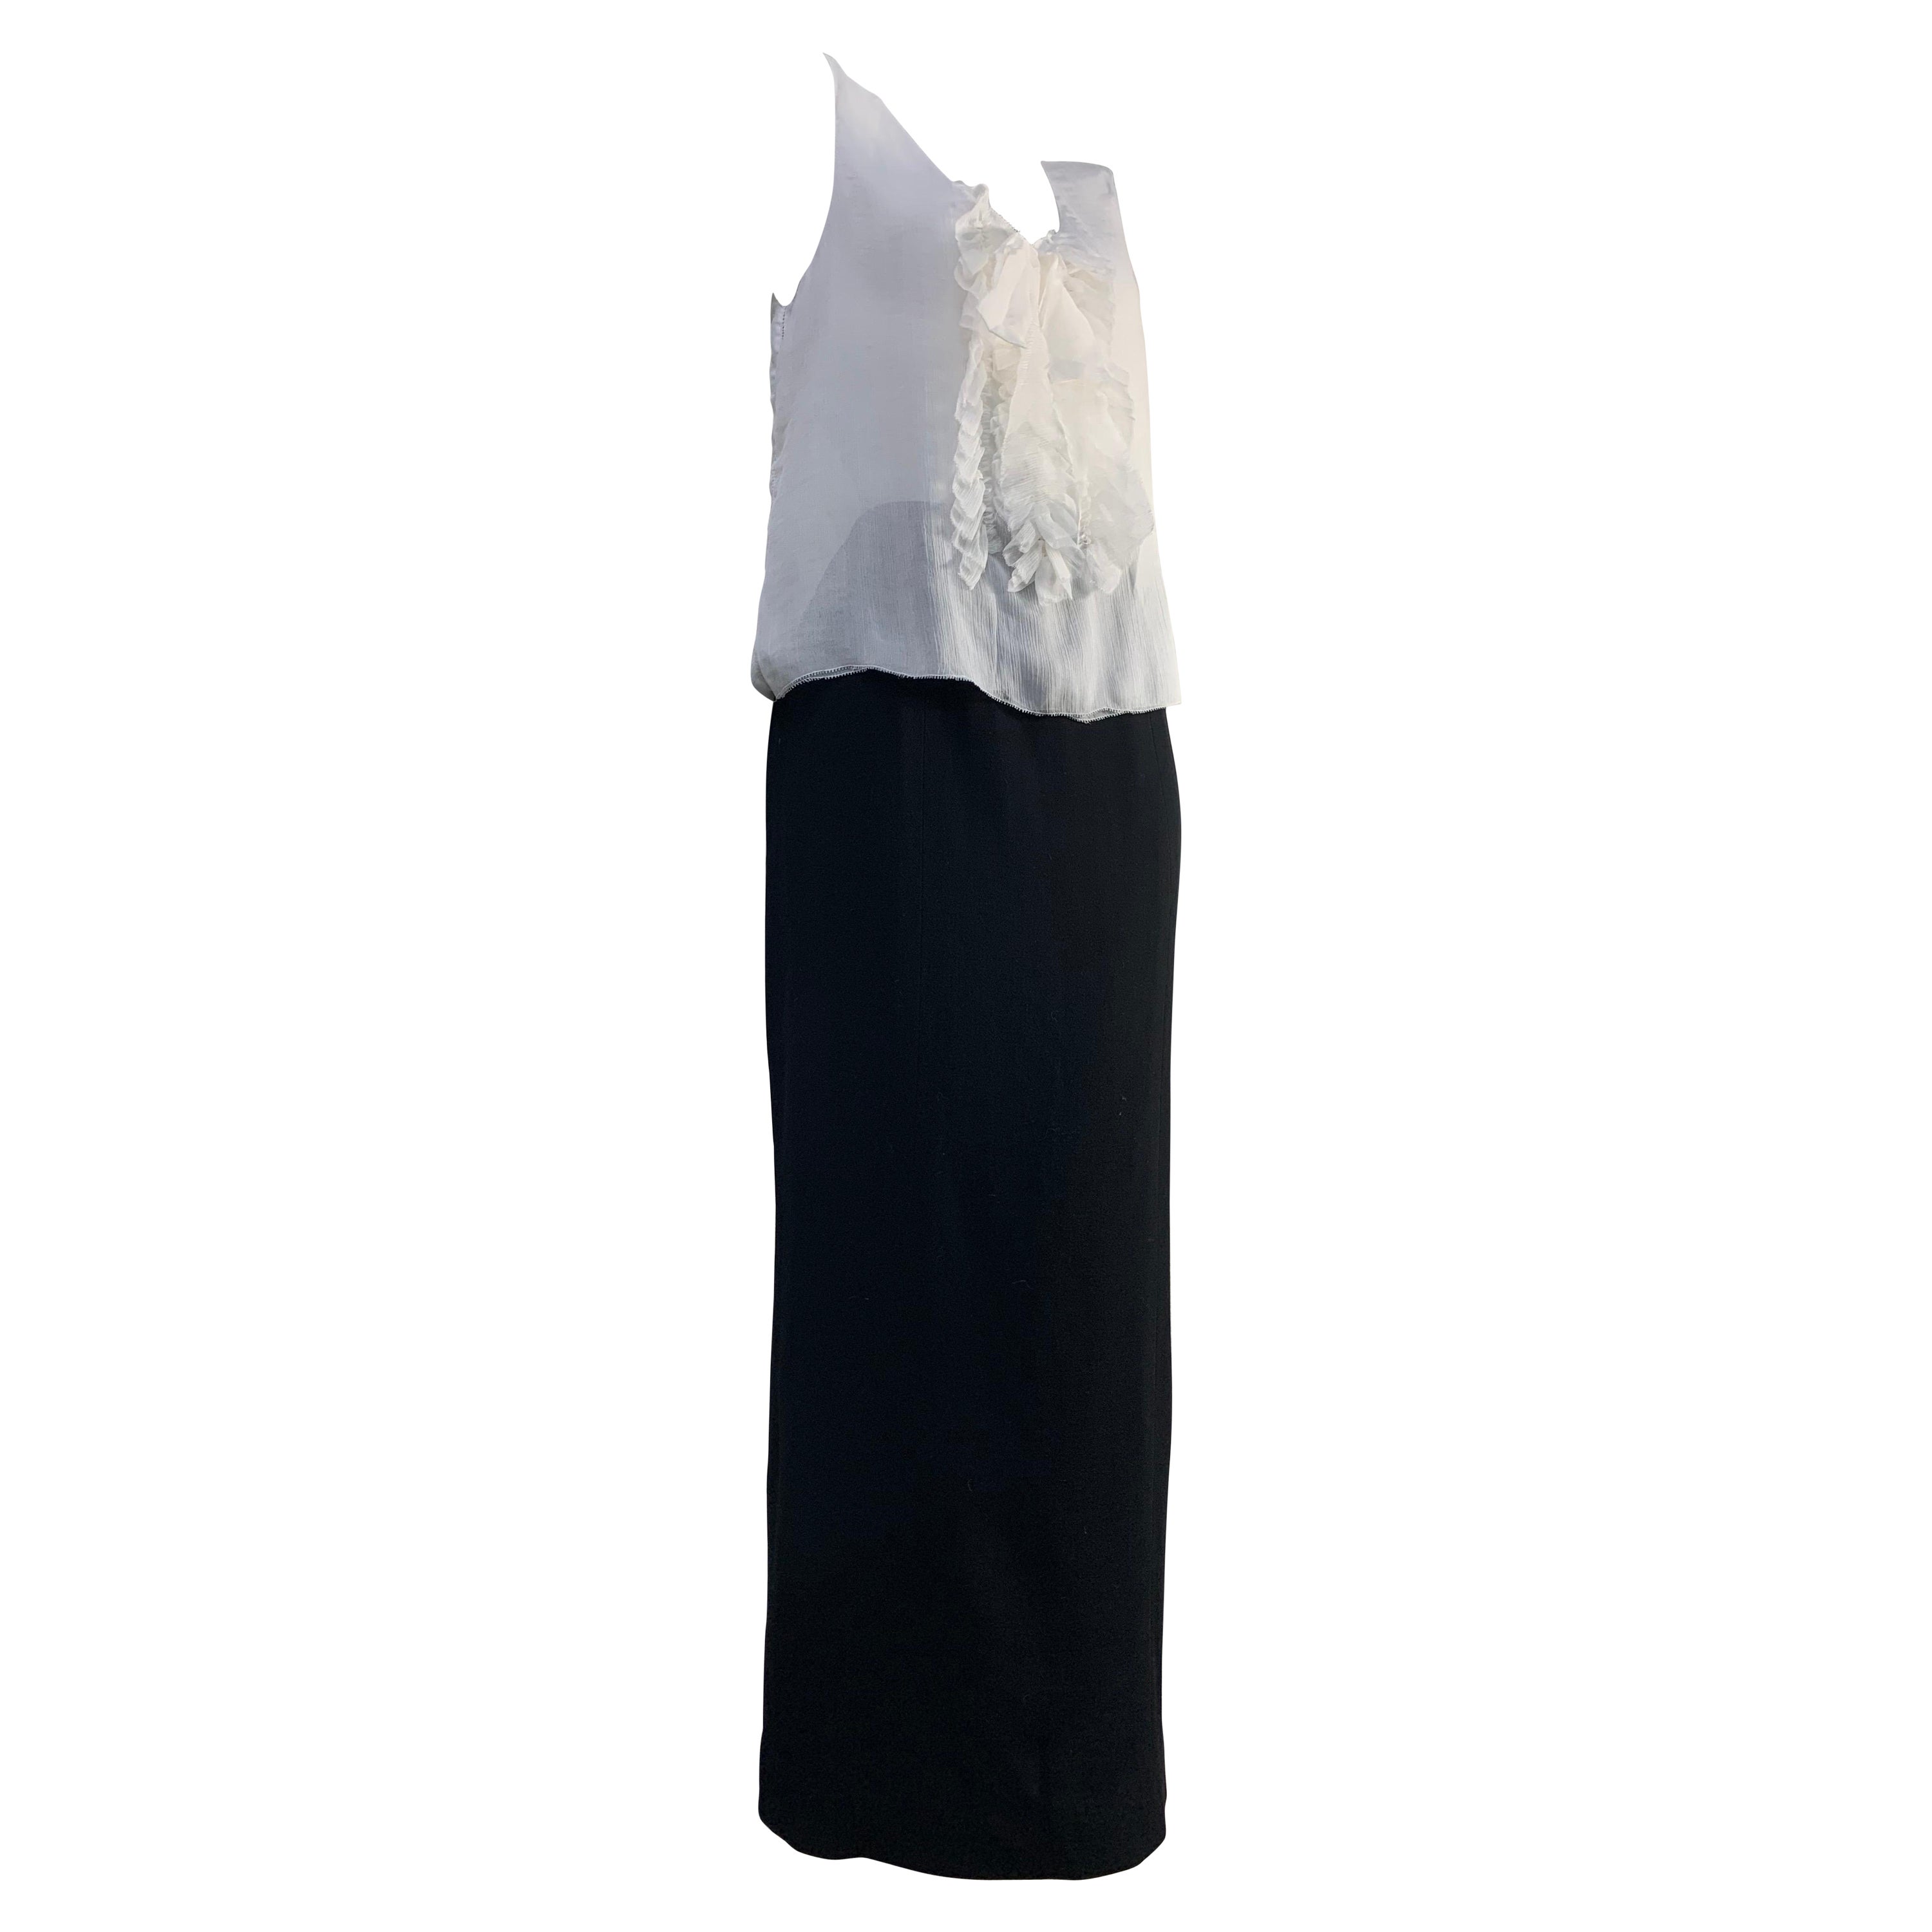 1998 Chanel Autumn Black Wool Crepe Pencil Skirt and White Silk Ruffled Camisole